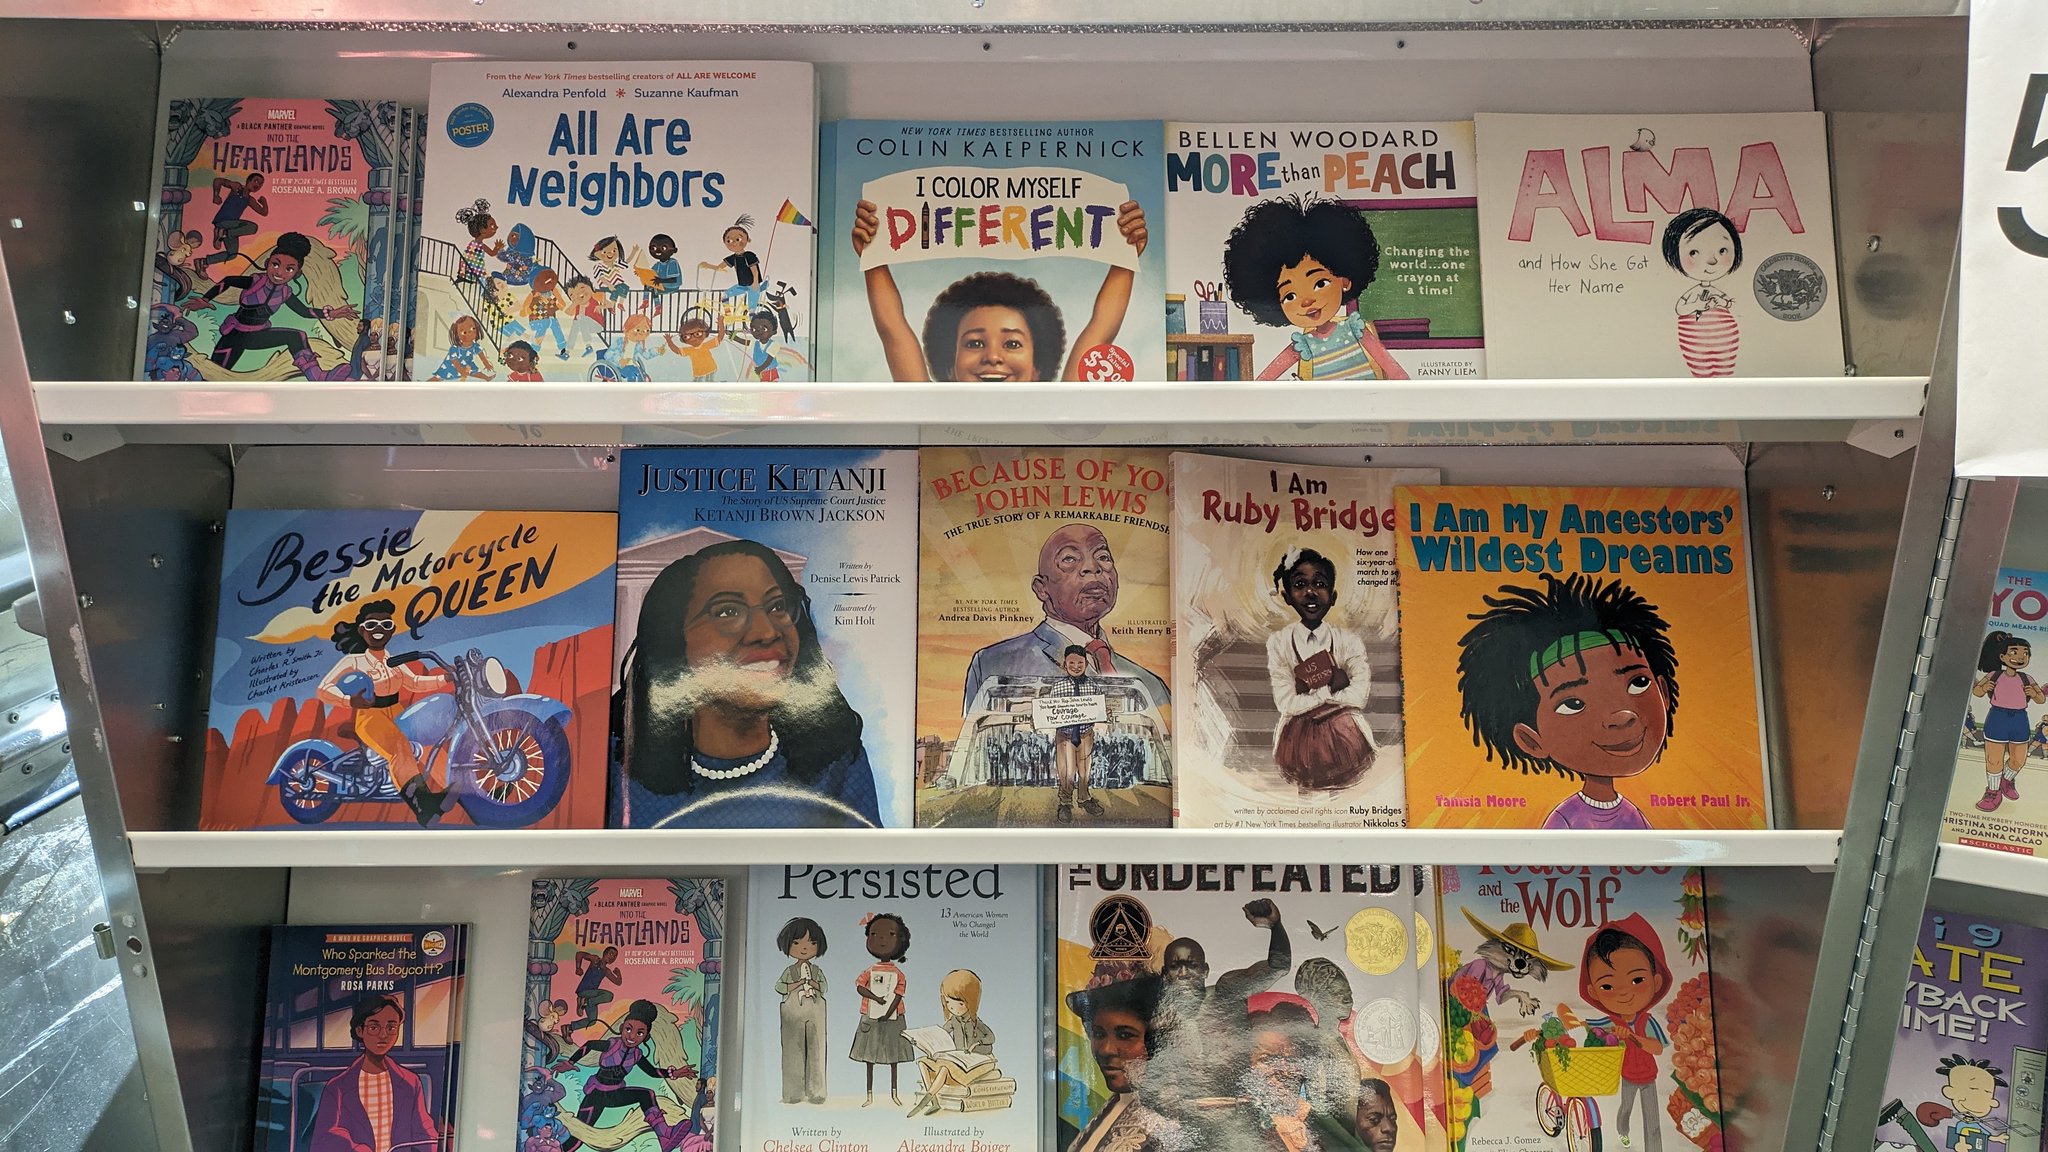 Scholastic Urged to Explore Other Options Instead of Limiting or  Partitioning Diverse Book Titles At School Book Fairs - PEN America